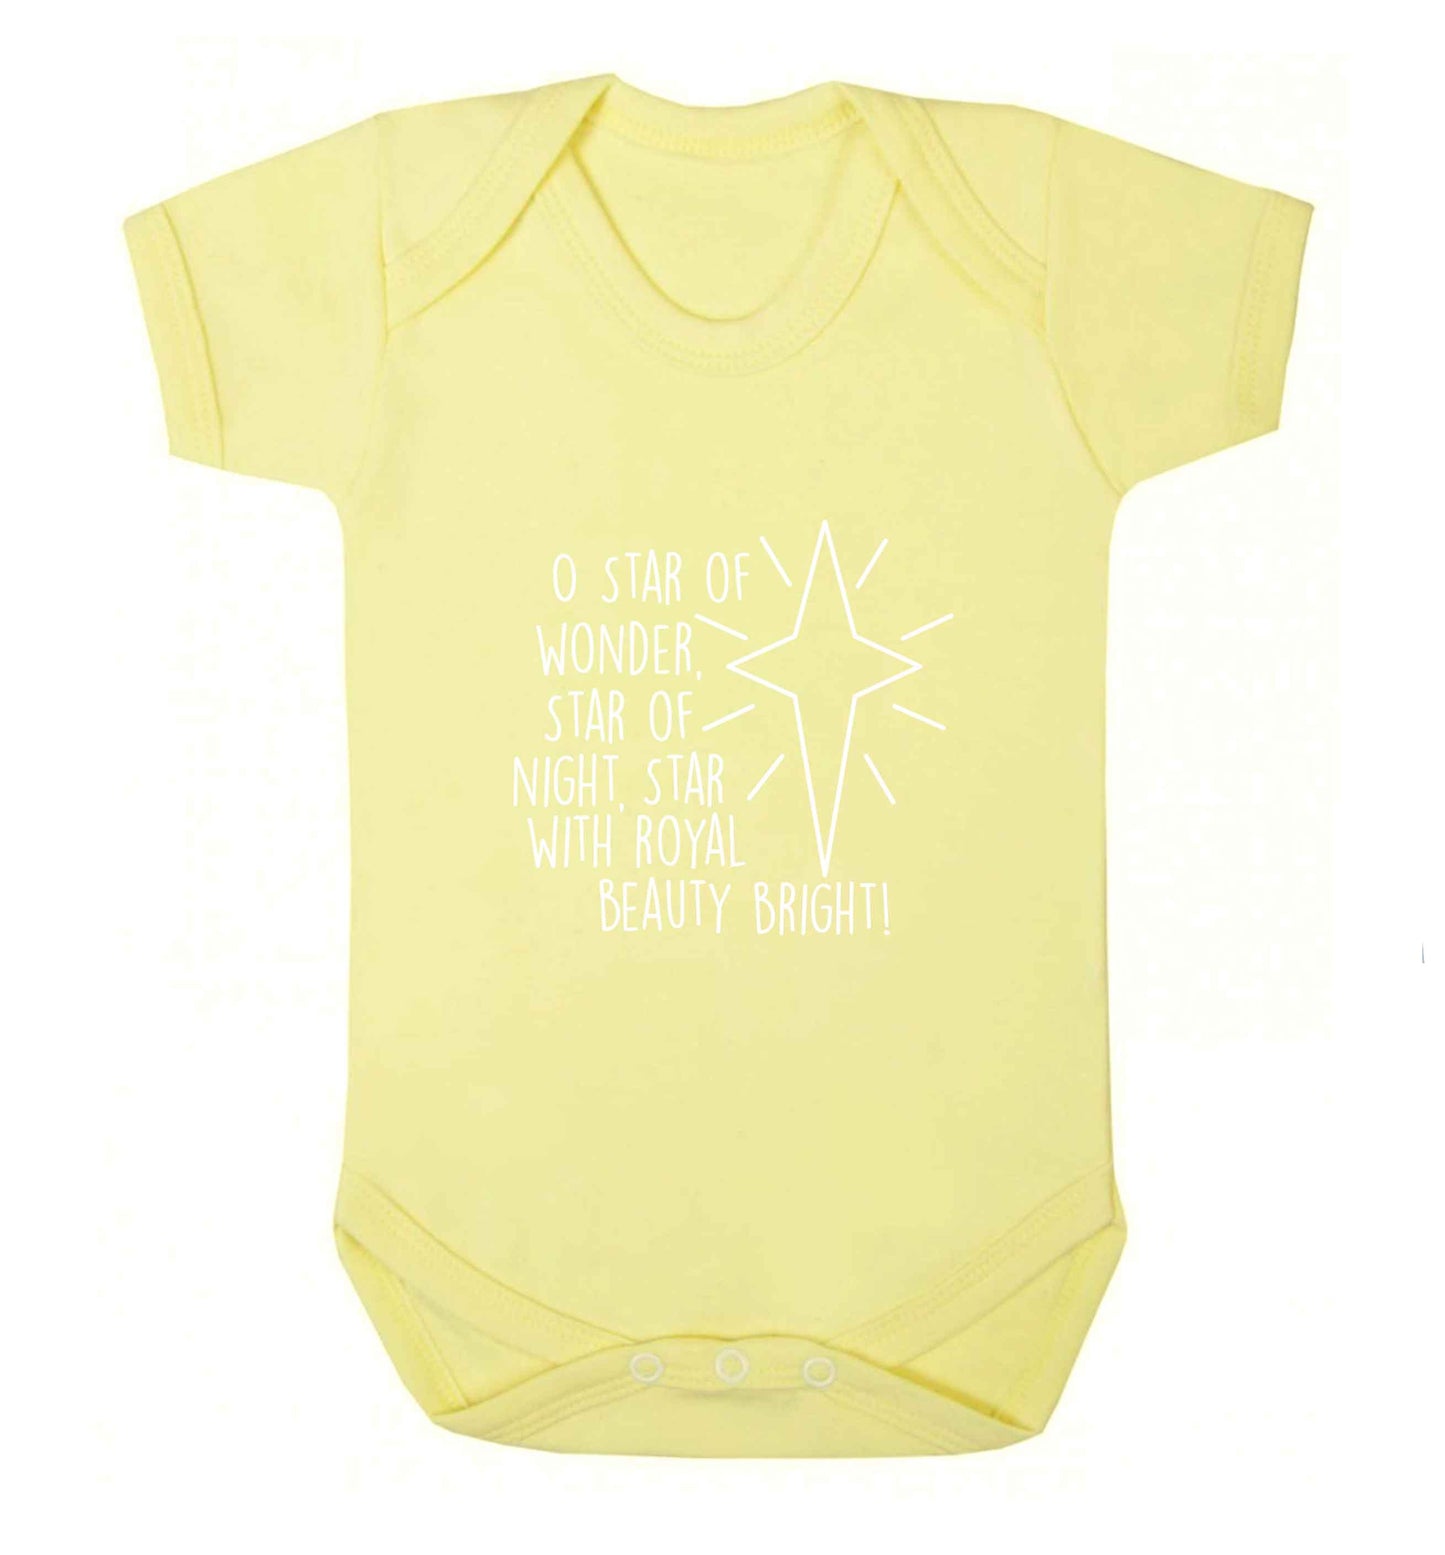 Oh star of wonder star of night, star with royal beauty bright baby vest pale yellow 18-24 months